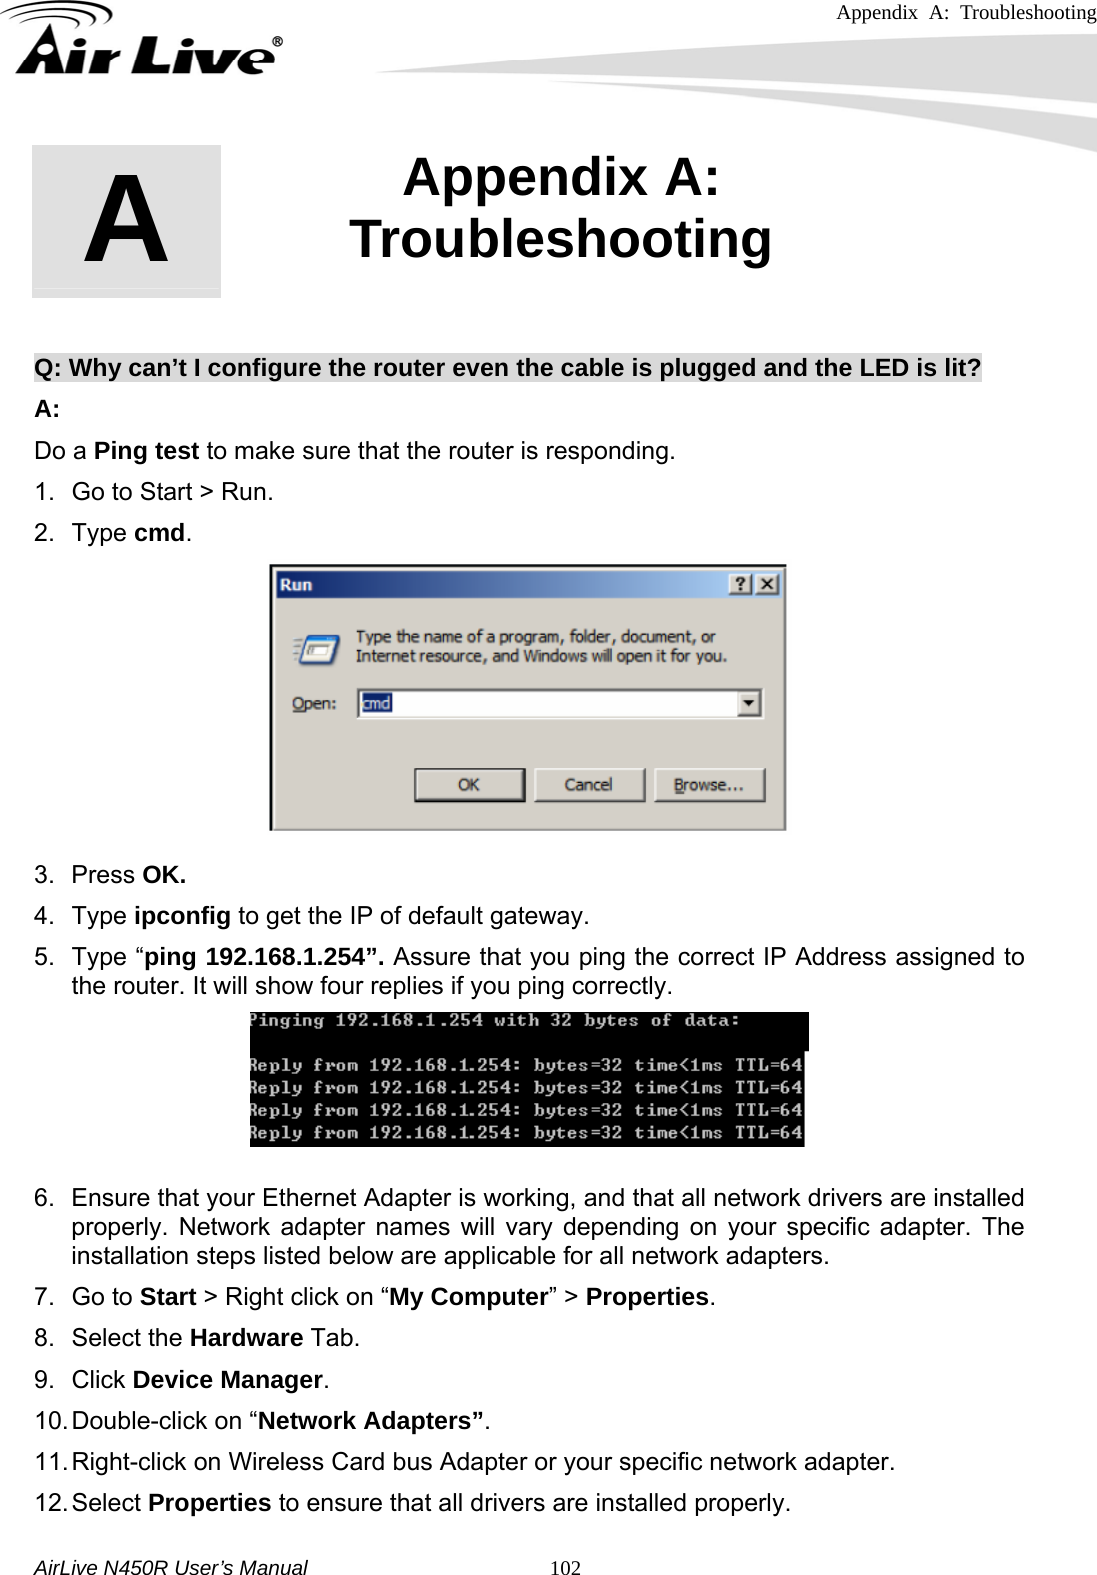 Appendix A: Troubleshooting     AirLive N450R User’s Manual   102      Q: Why can’t I configure the router even the cable is plugged and the LED is lit? A: Do a Ping test to make sure that the router is responding.           1.  Go to Start &gt; Run.   2. Type cmd.   3. Press OK. 4. Type ipconfig to get the IP of default gateway. 5. Type “ping 192.168.1.254”. Assure that you ping the correct IP Address assigned to the router. It will show four replies if you ping correctly.  6.  Ensure that your Ethernet Adapter is working, and that all network drivers are installed properly. Network adapter names will vary depending on your specific adapter. The installation steps listed below are applicable for all network adapters. 7. Go to Start &gt; Right click on “My Computer” &gt; Properties. 8. Select the Hardware Tab. 9. Click Device Manager. 10. Double-click on “Network Adapters”. 11. Right-click on Wireless Card bus Adapter or your specific network adapter. 12. Select  Properties to ensure that all drivers are installed properly. A  Appendix A: Troubleshooting  